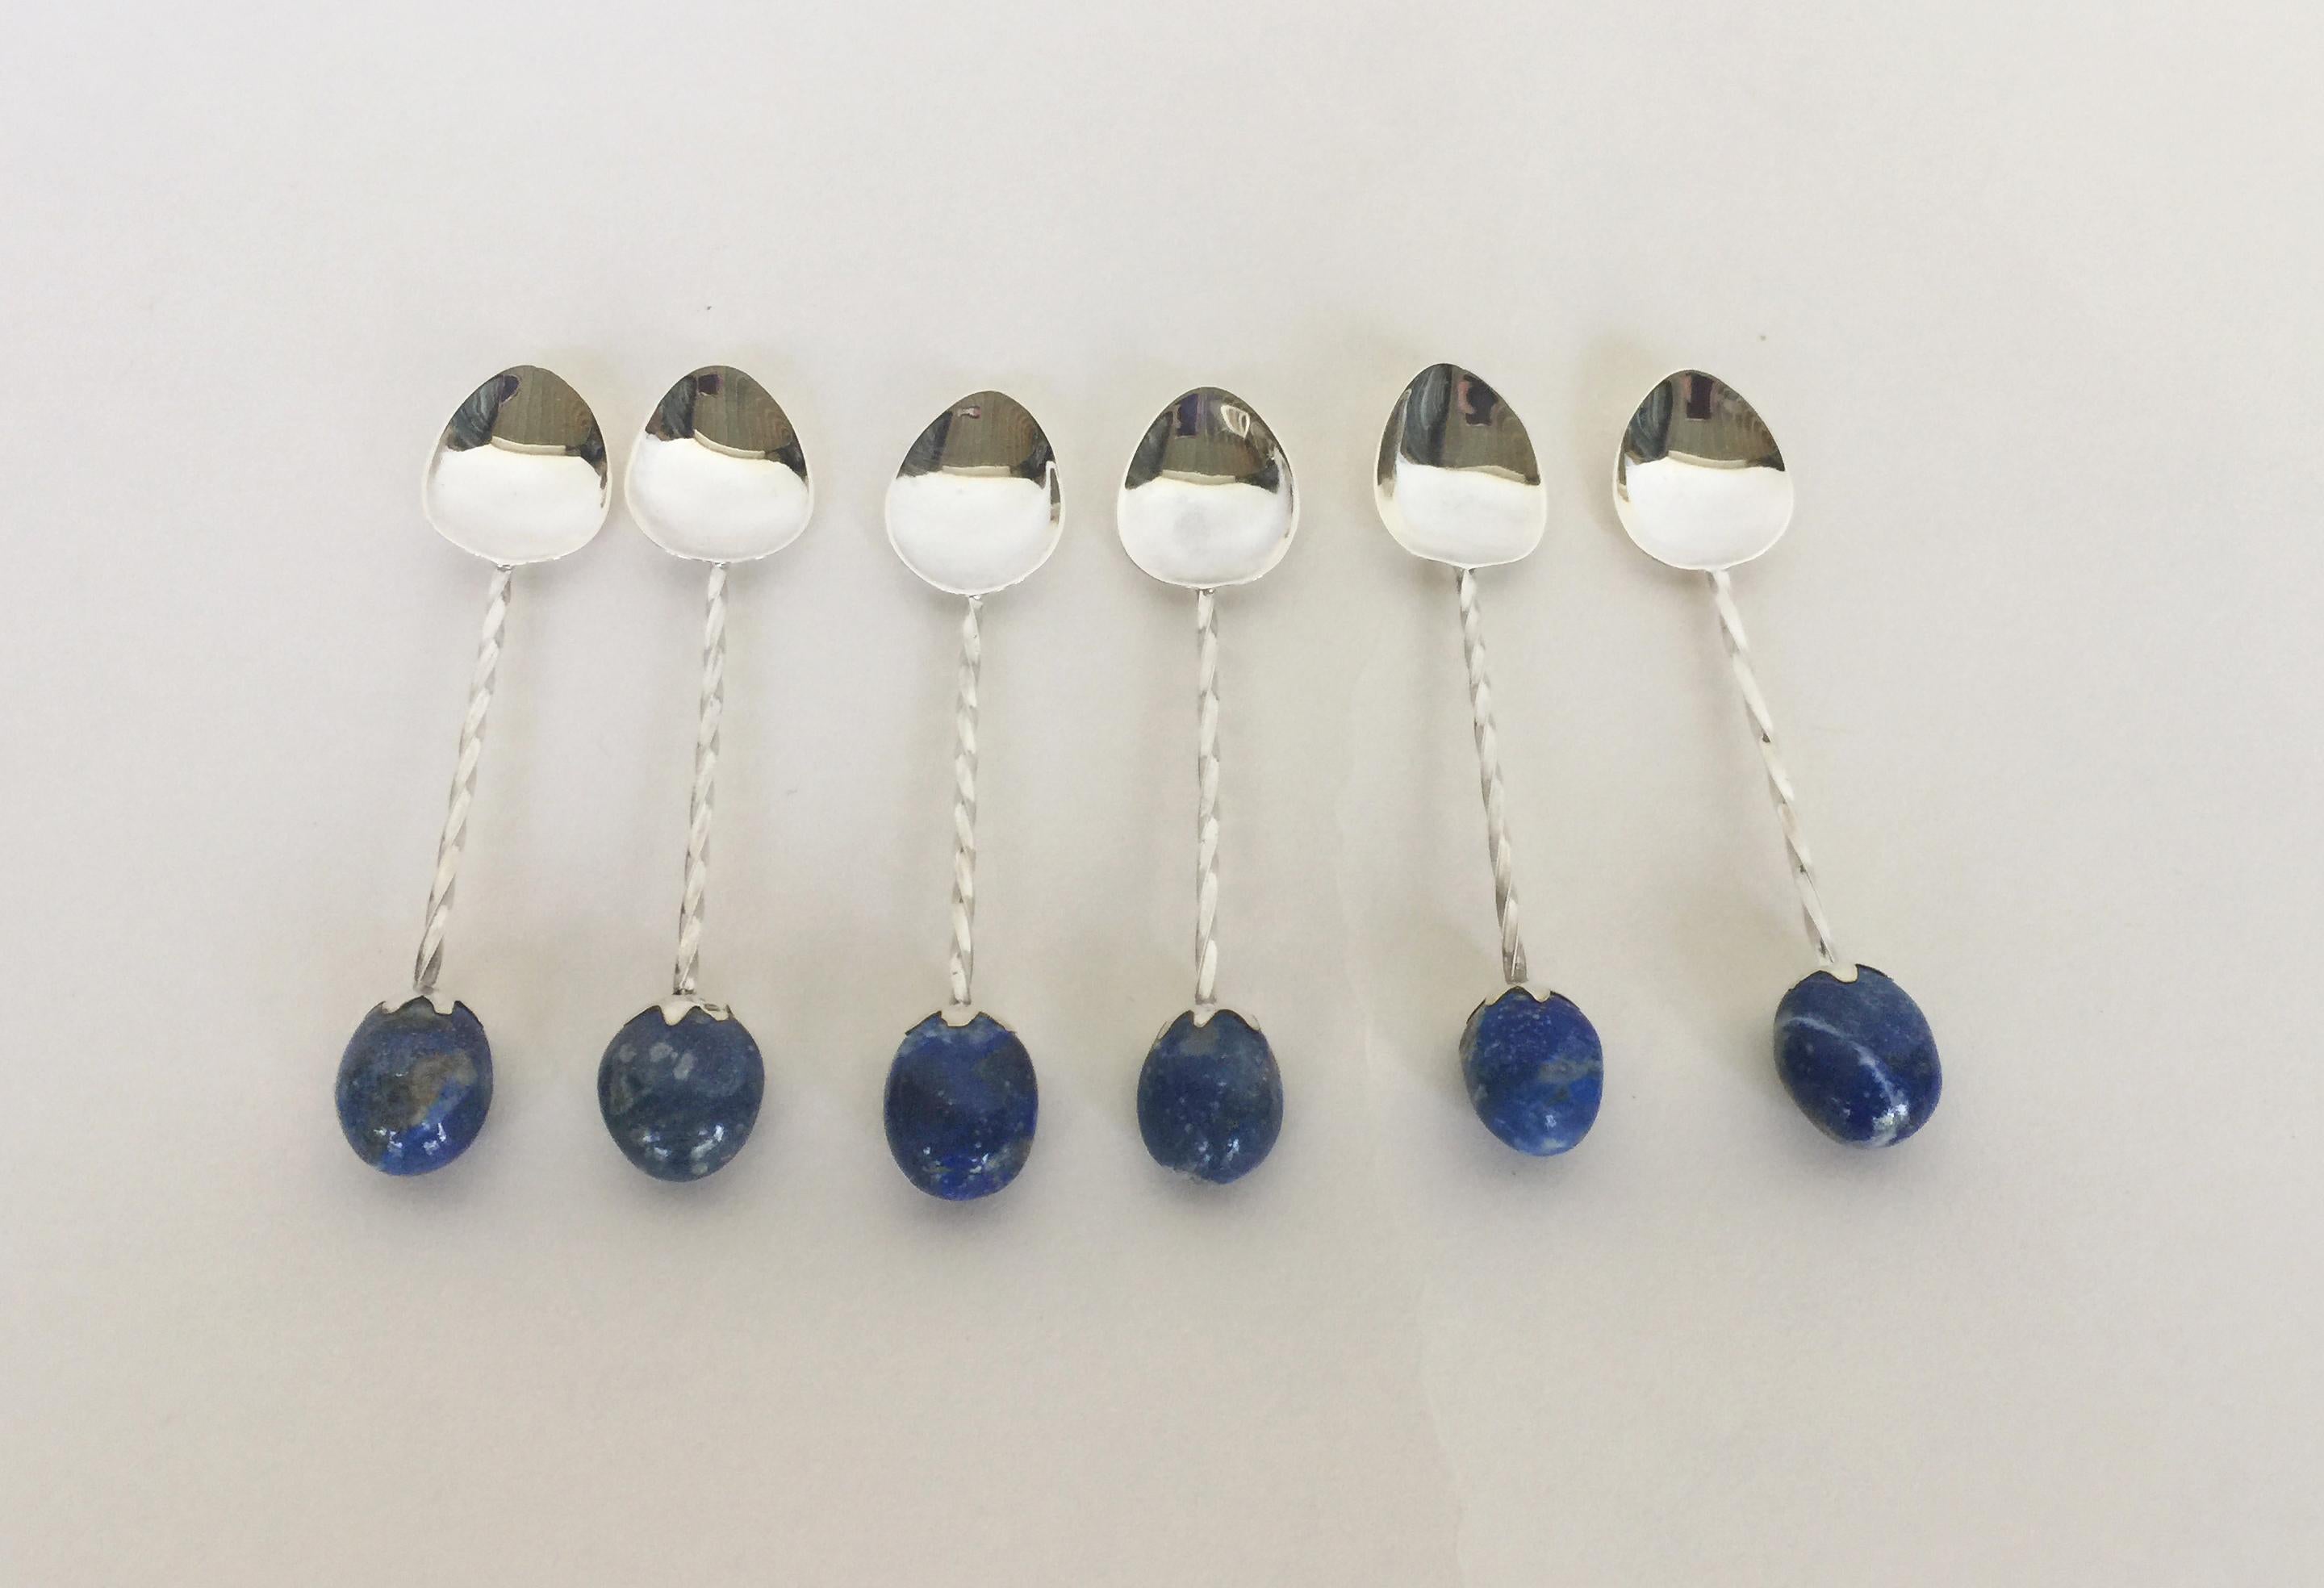 Artist Marina J 6 Rhodium Plated Sterling Silver Tea Spoon Set with Lapis Lazuli Stones For Sale